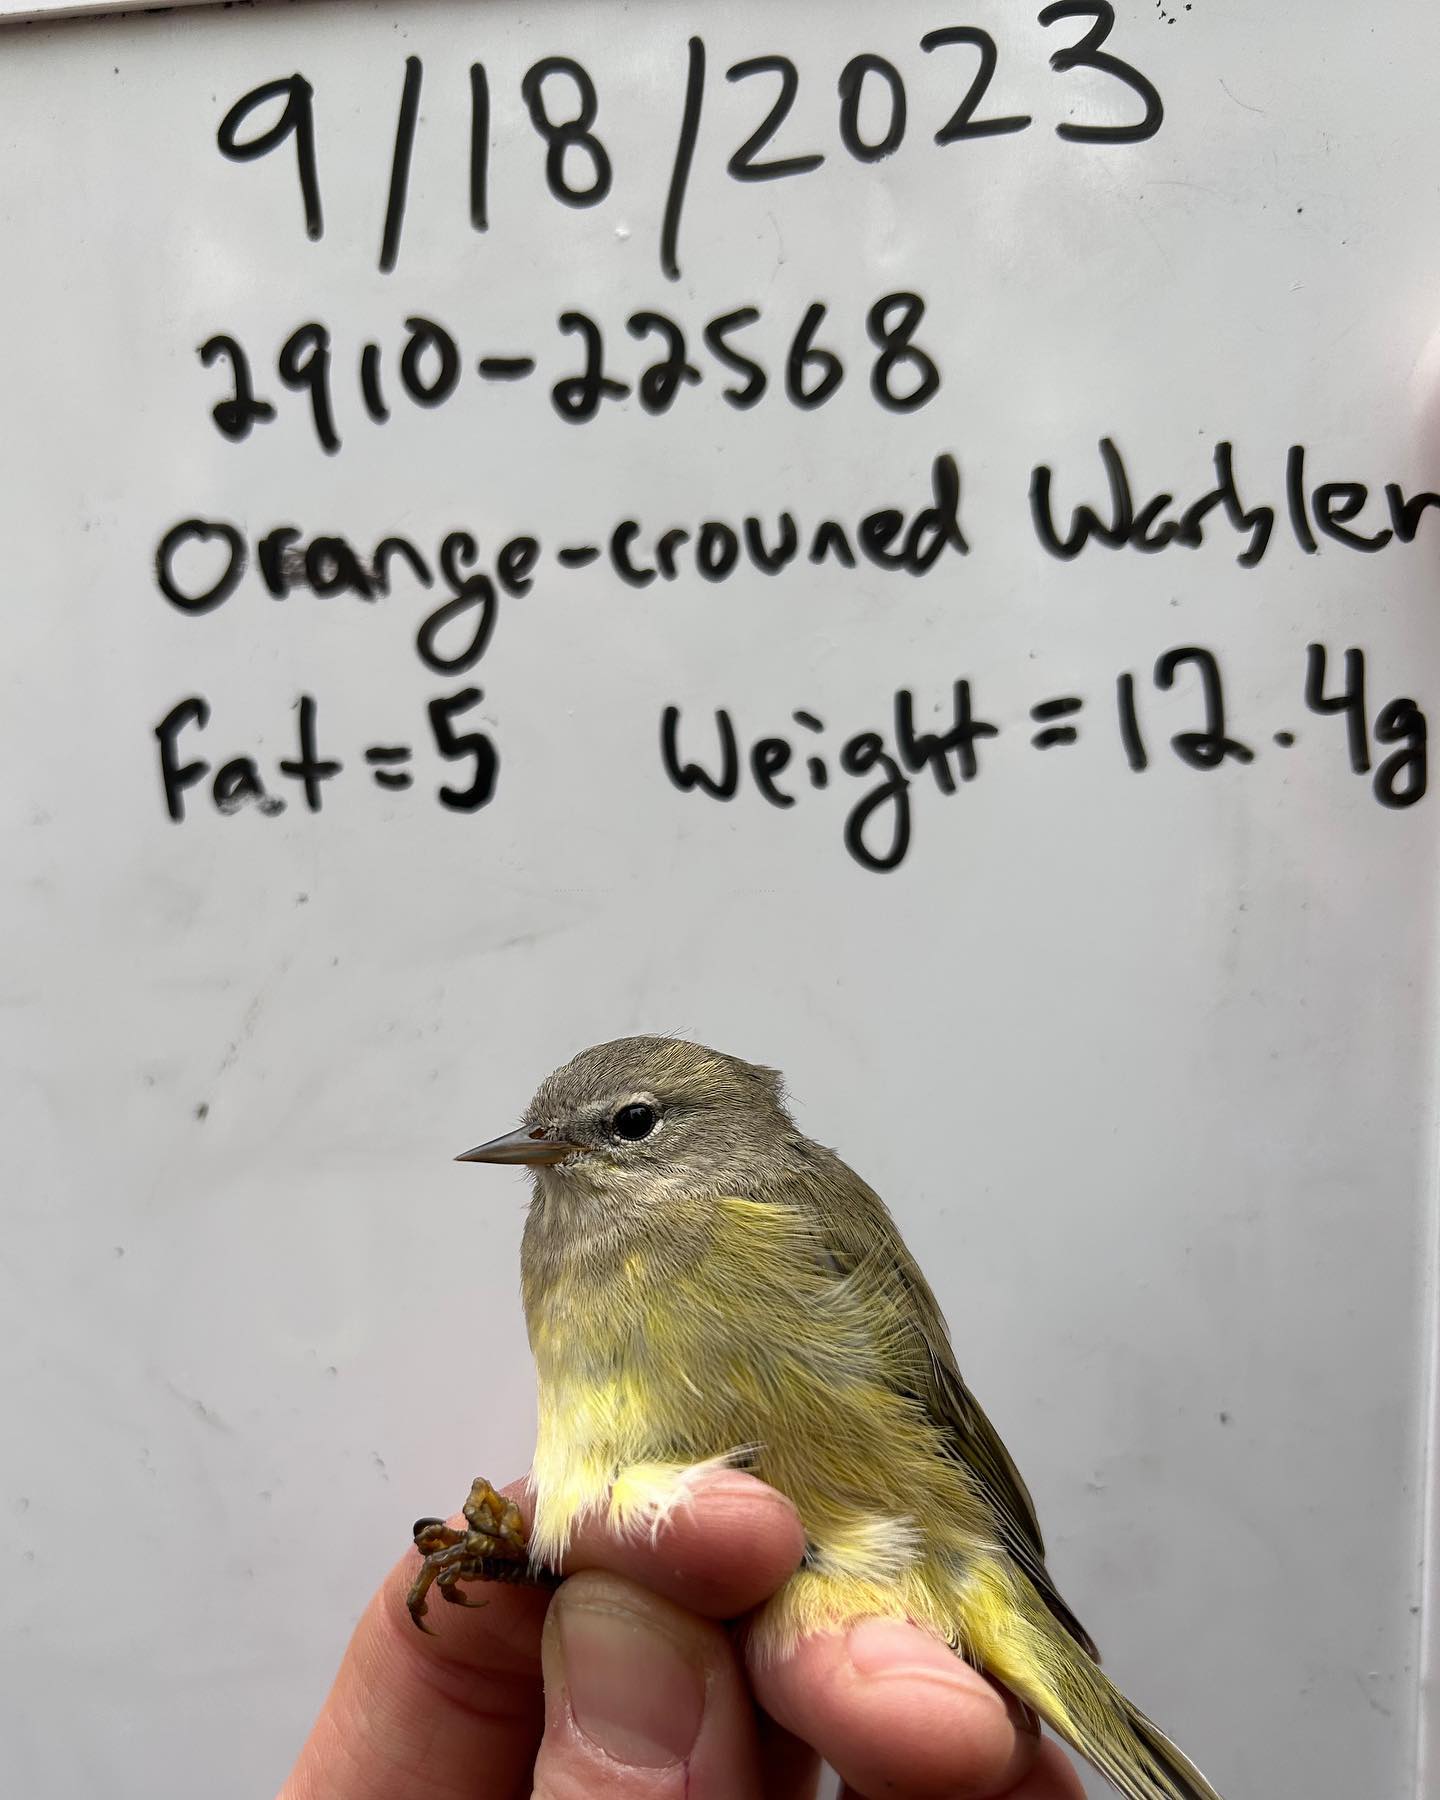 A yellow and olive bird sits on a person's hand. In the background, data about the bird is written on a whiteboard.